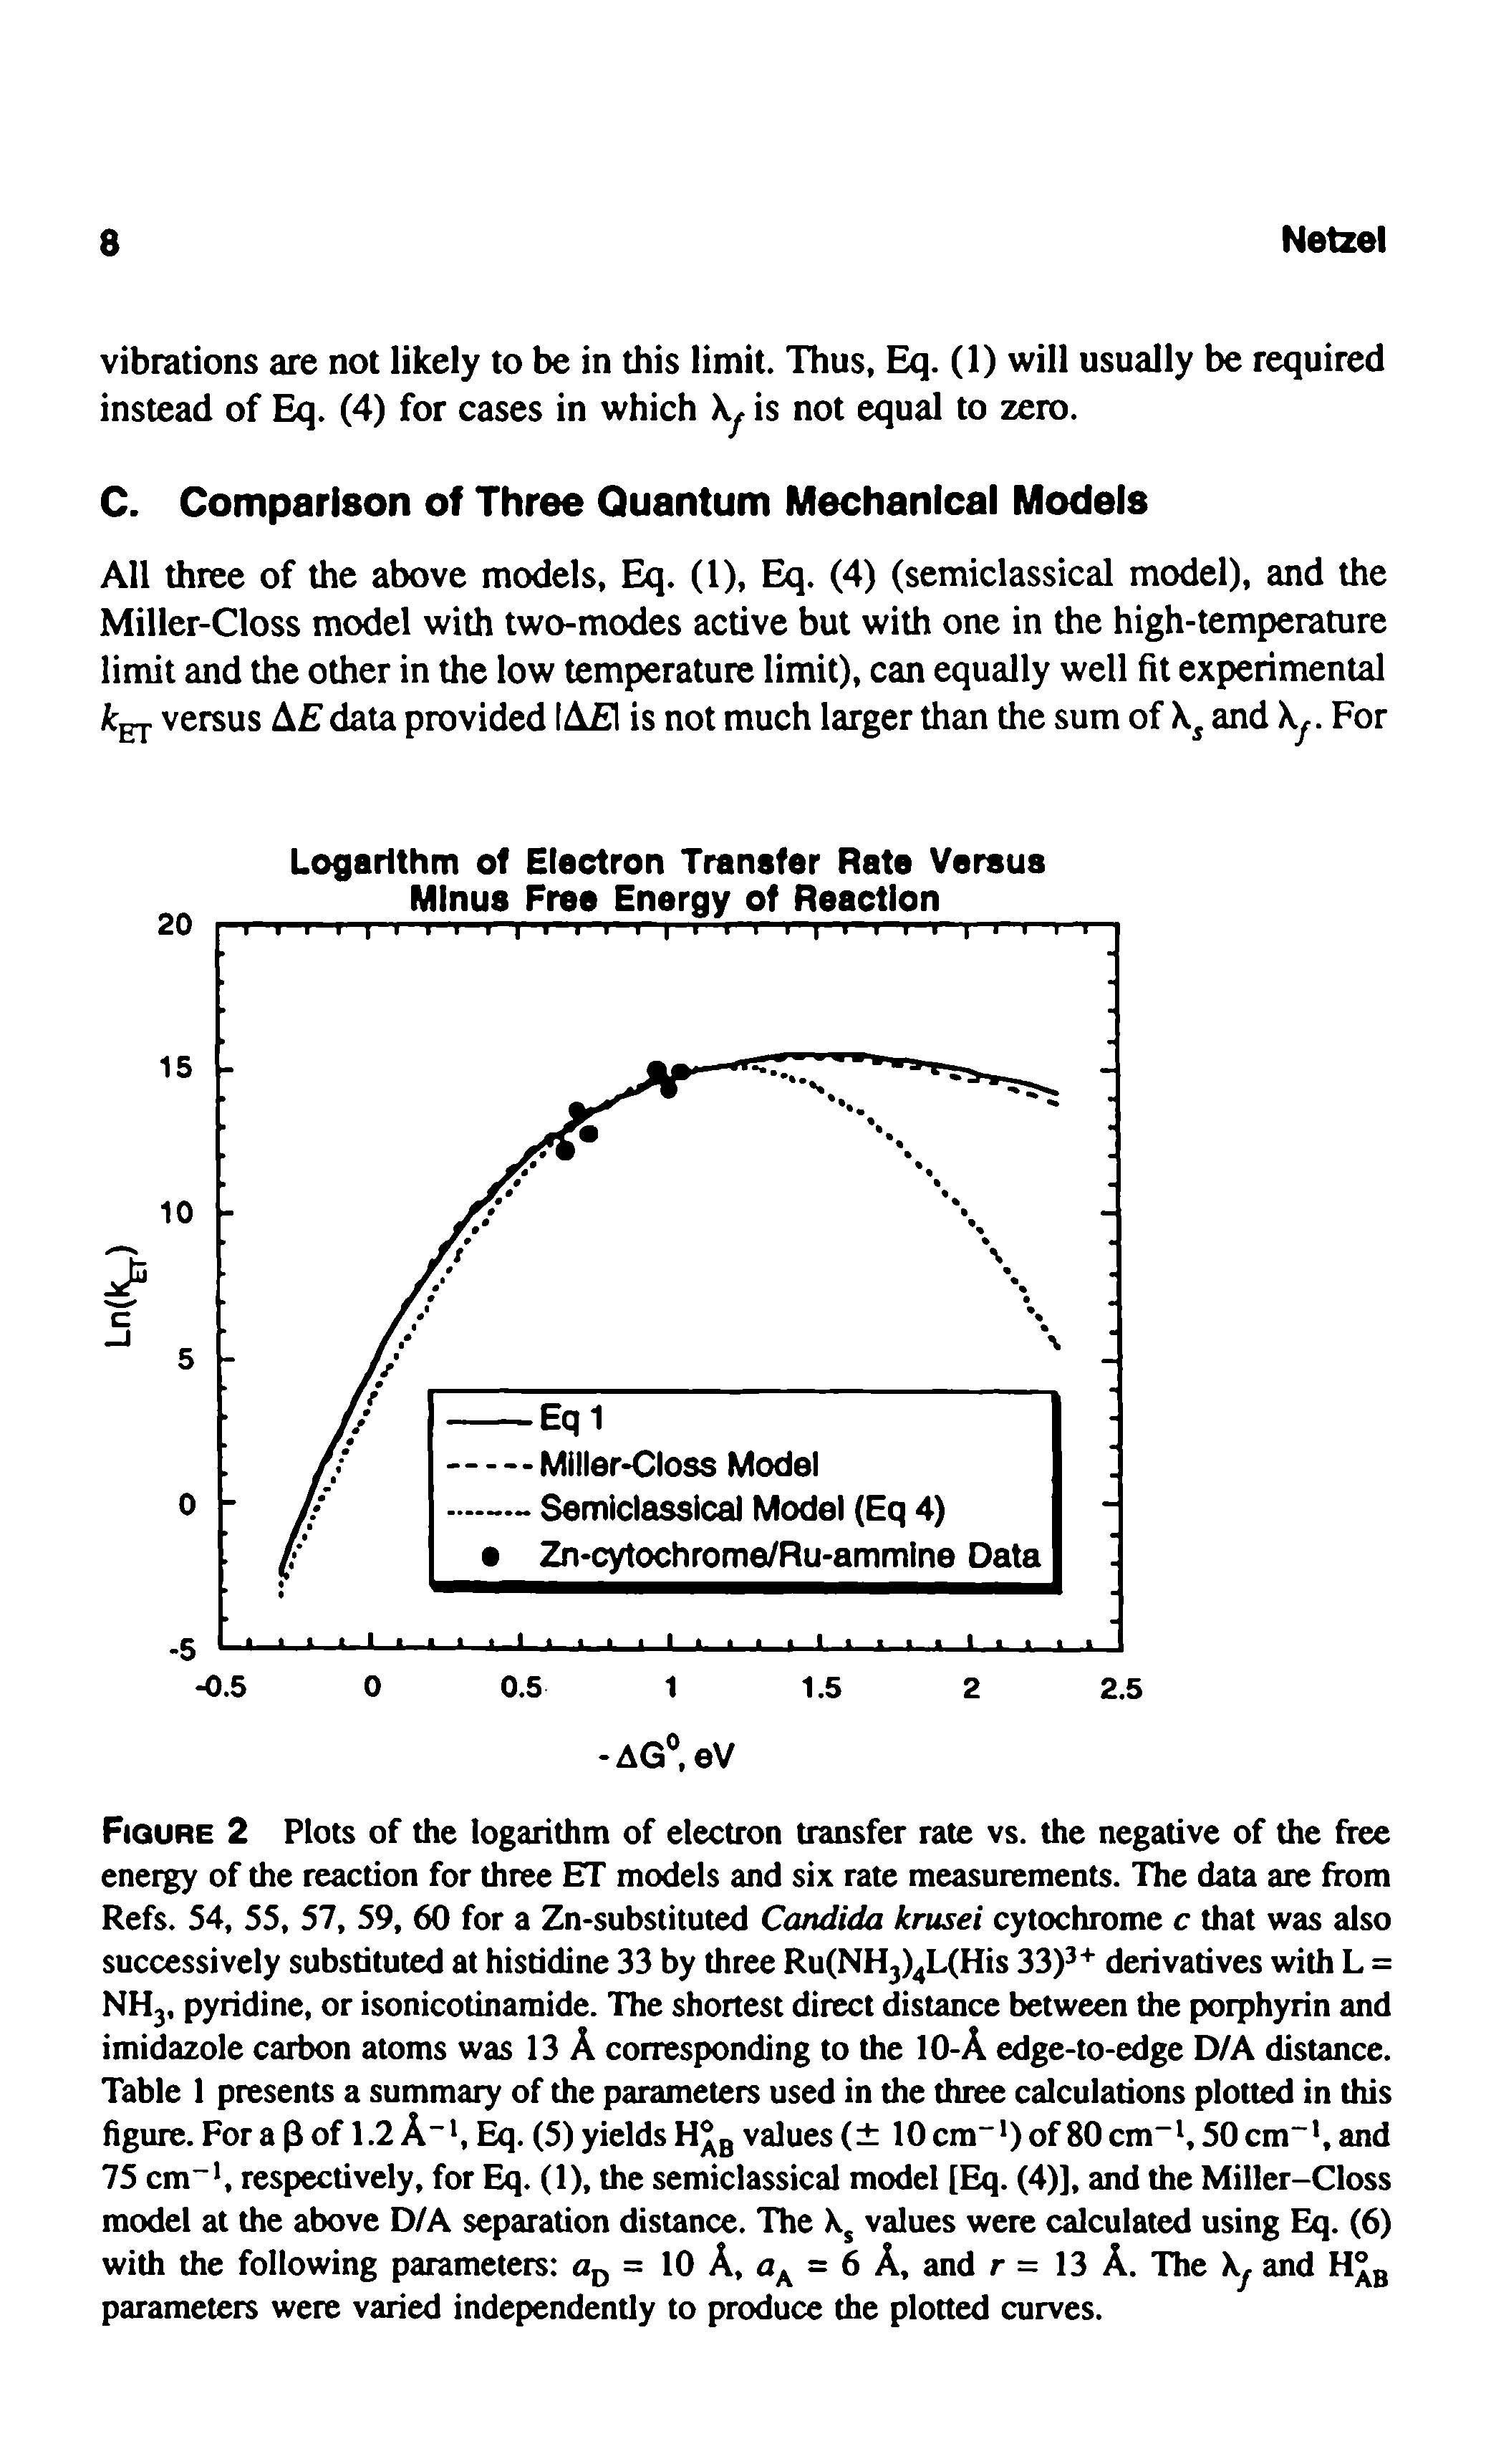 Figure 2 Plots of the logarithm of electron transfer rate vs. the negative of the free energy of the reaction for three ET models and six rate measurements. The data are from Refs. 54, 55, 57, 59, 60 for a Zn-substituted Candida krusei cytochrome c that was also successively substituted at histidine 33 by three Ru(NH3)4L(His 33)3+ derivatives with L = NH3, pyridine, or isonicotinamide. The shortest direct distance between the porphyrin and imidazole carbon atoms was 13 A corresponding to the 10-A edge-to-edge D/A distance. Table 1 presents a summary of the parameters used in the three calculations plotted in this figure. For a (3 of 1.2 A-1, Eq. (5) yields HAB values ( 10 cm-1) of 80 cm-1,50 cm-1, and 75 cm-1, respectively, for Eq. (1), the semiclassical model [Eq. (4)], and the Miller-Closs model at the above D/A separation distance. The s values were calculated using Eq. (6) with the following parameters aD = 10 A, aA = 6 A, and r = 13 A. The kj and H°B parameters were varied independently to produce the plotted curves.